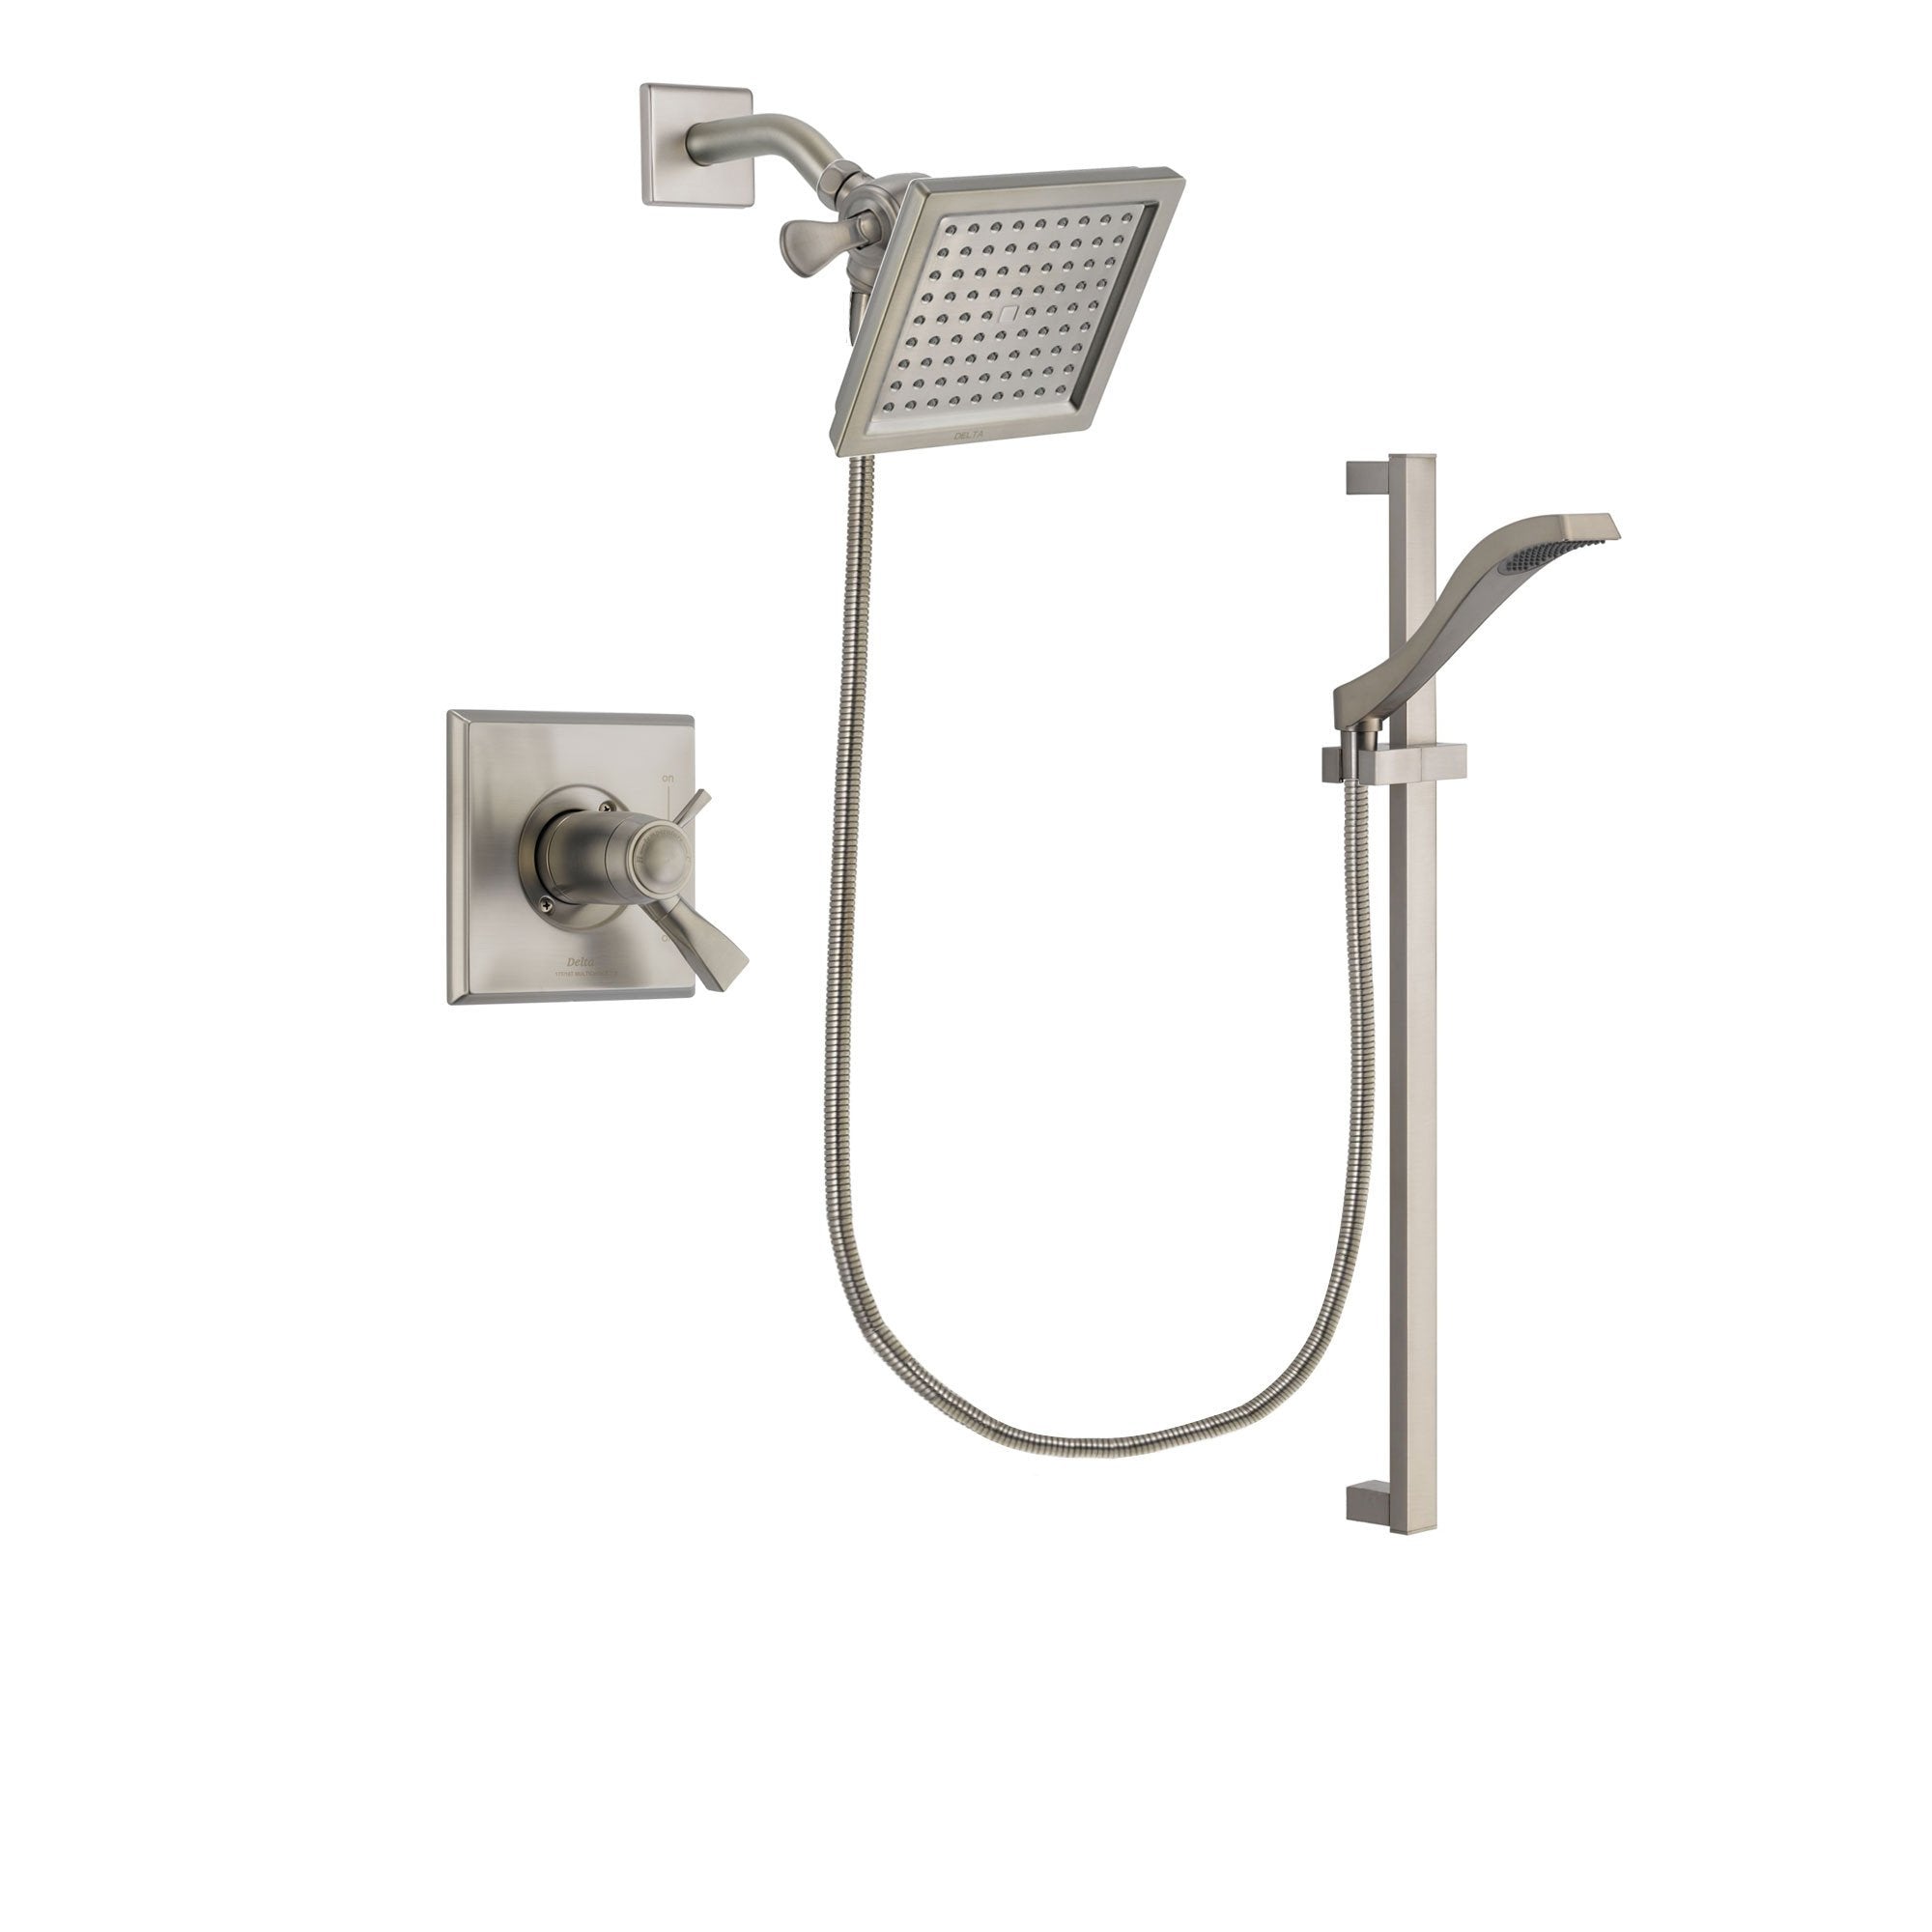 Delta Dryden Stainless Steel Finish Shower Faucet System w/ Hand Spray DSP2238V